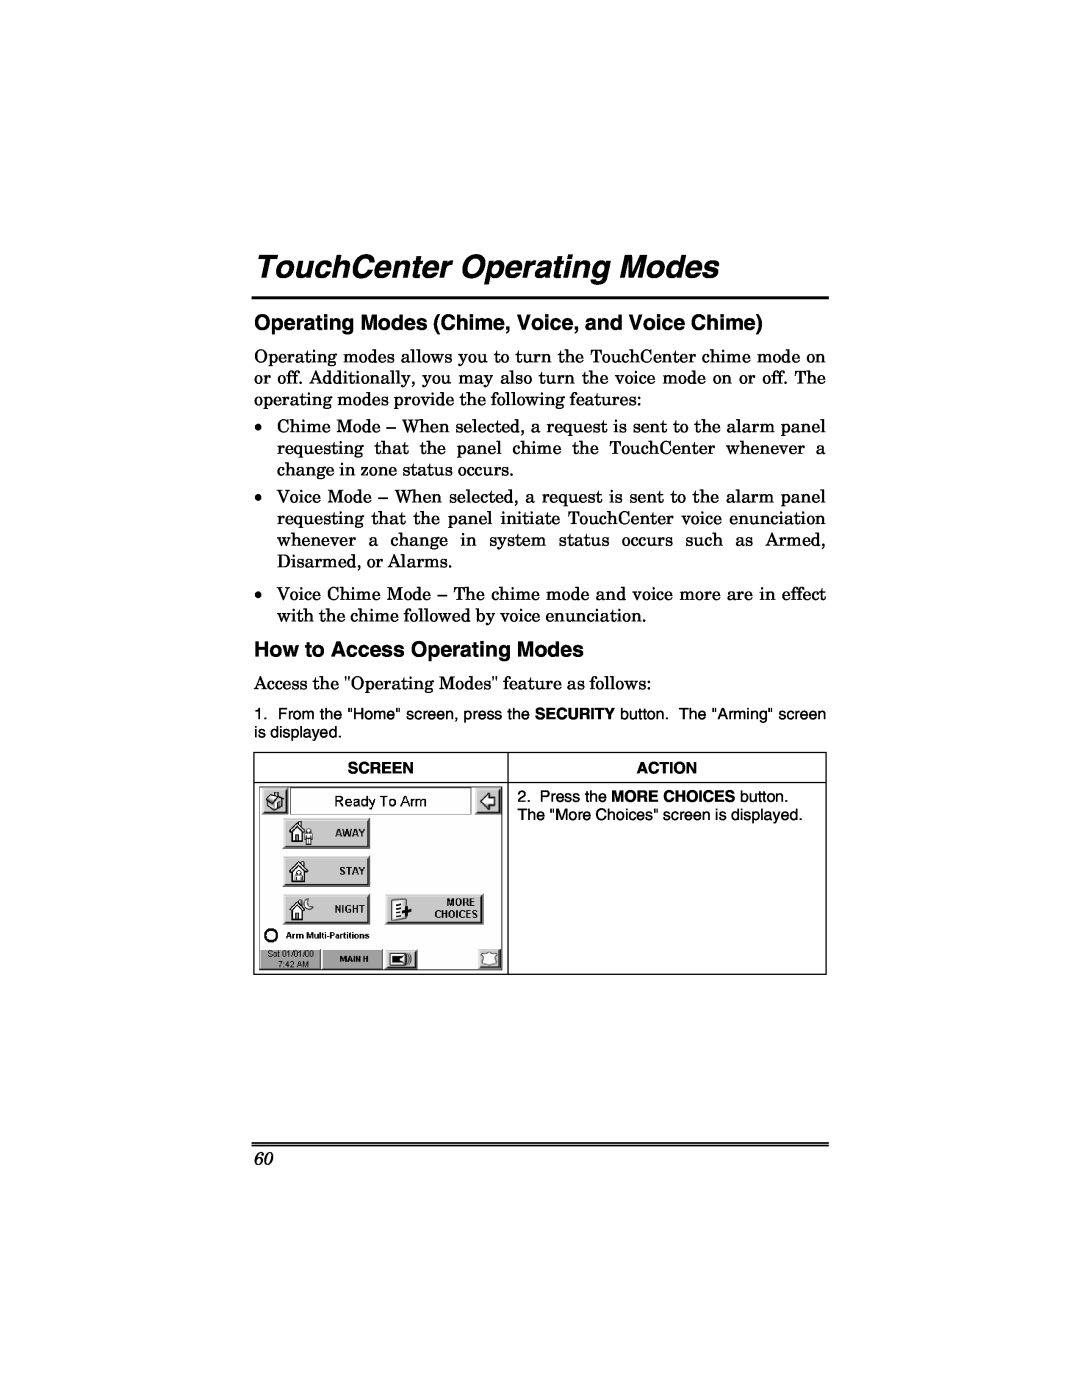 Honeywell 6271V TouchCenter Operating Modes, Operating Modes Chime, Voice, and Voice Chime, How to Access Operating Modes 